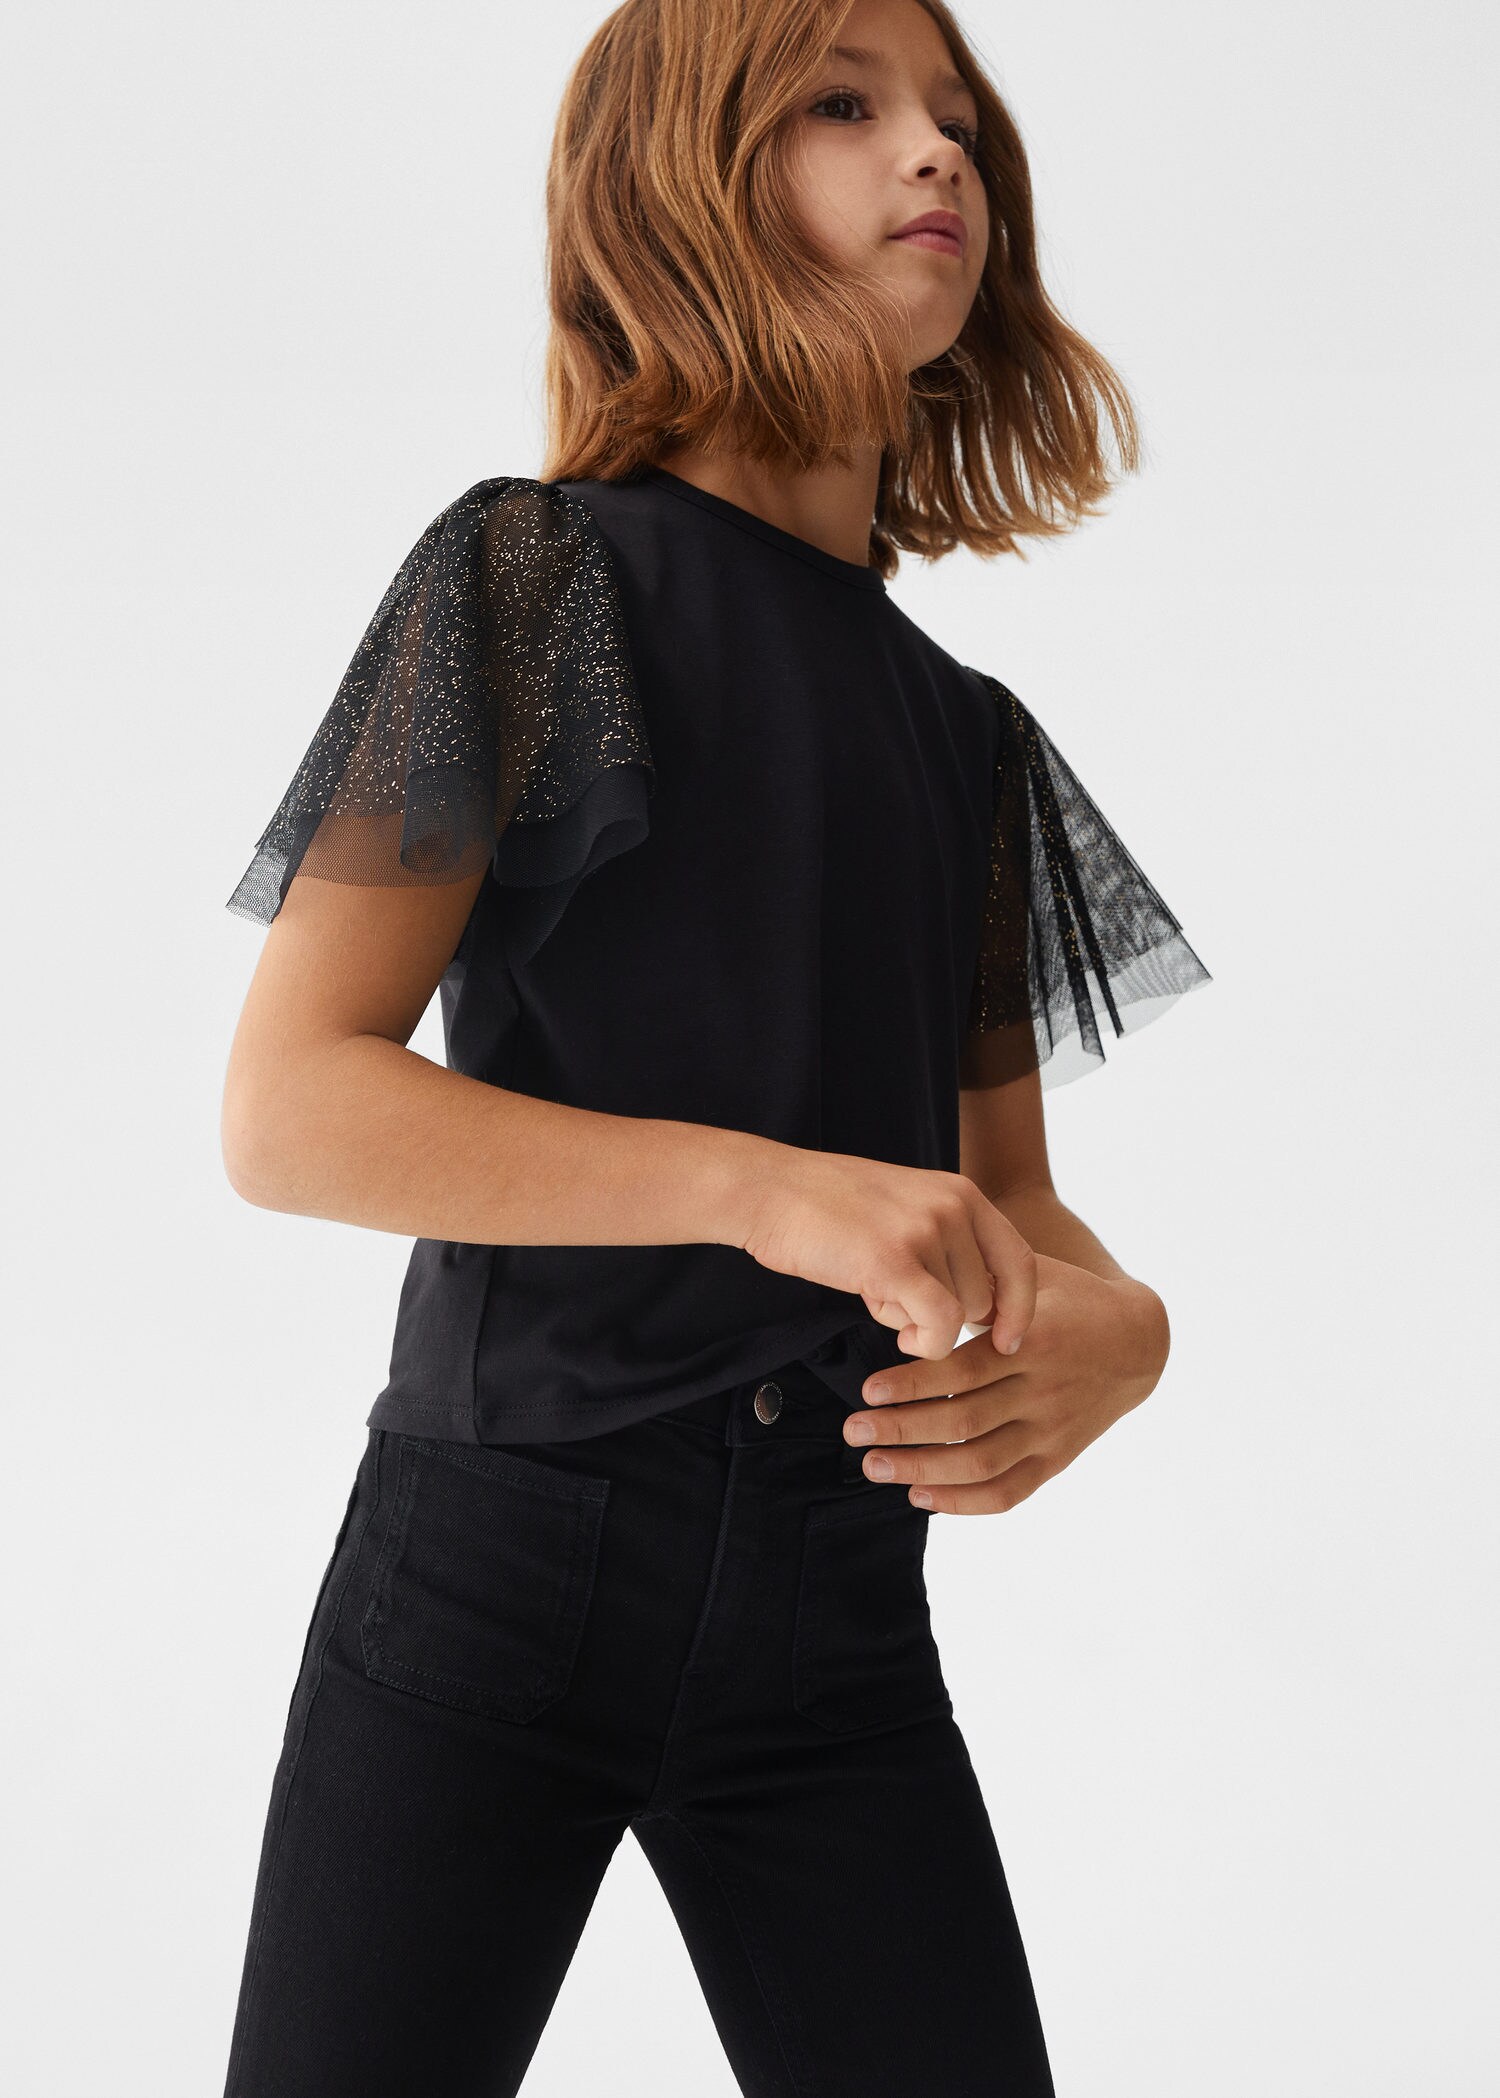 Mango short sleeve lace top in black